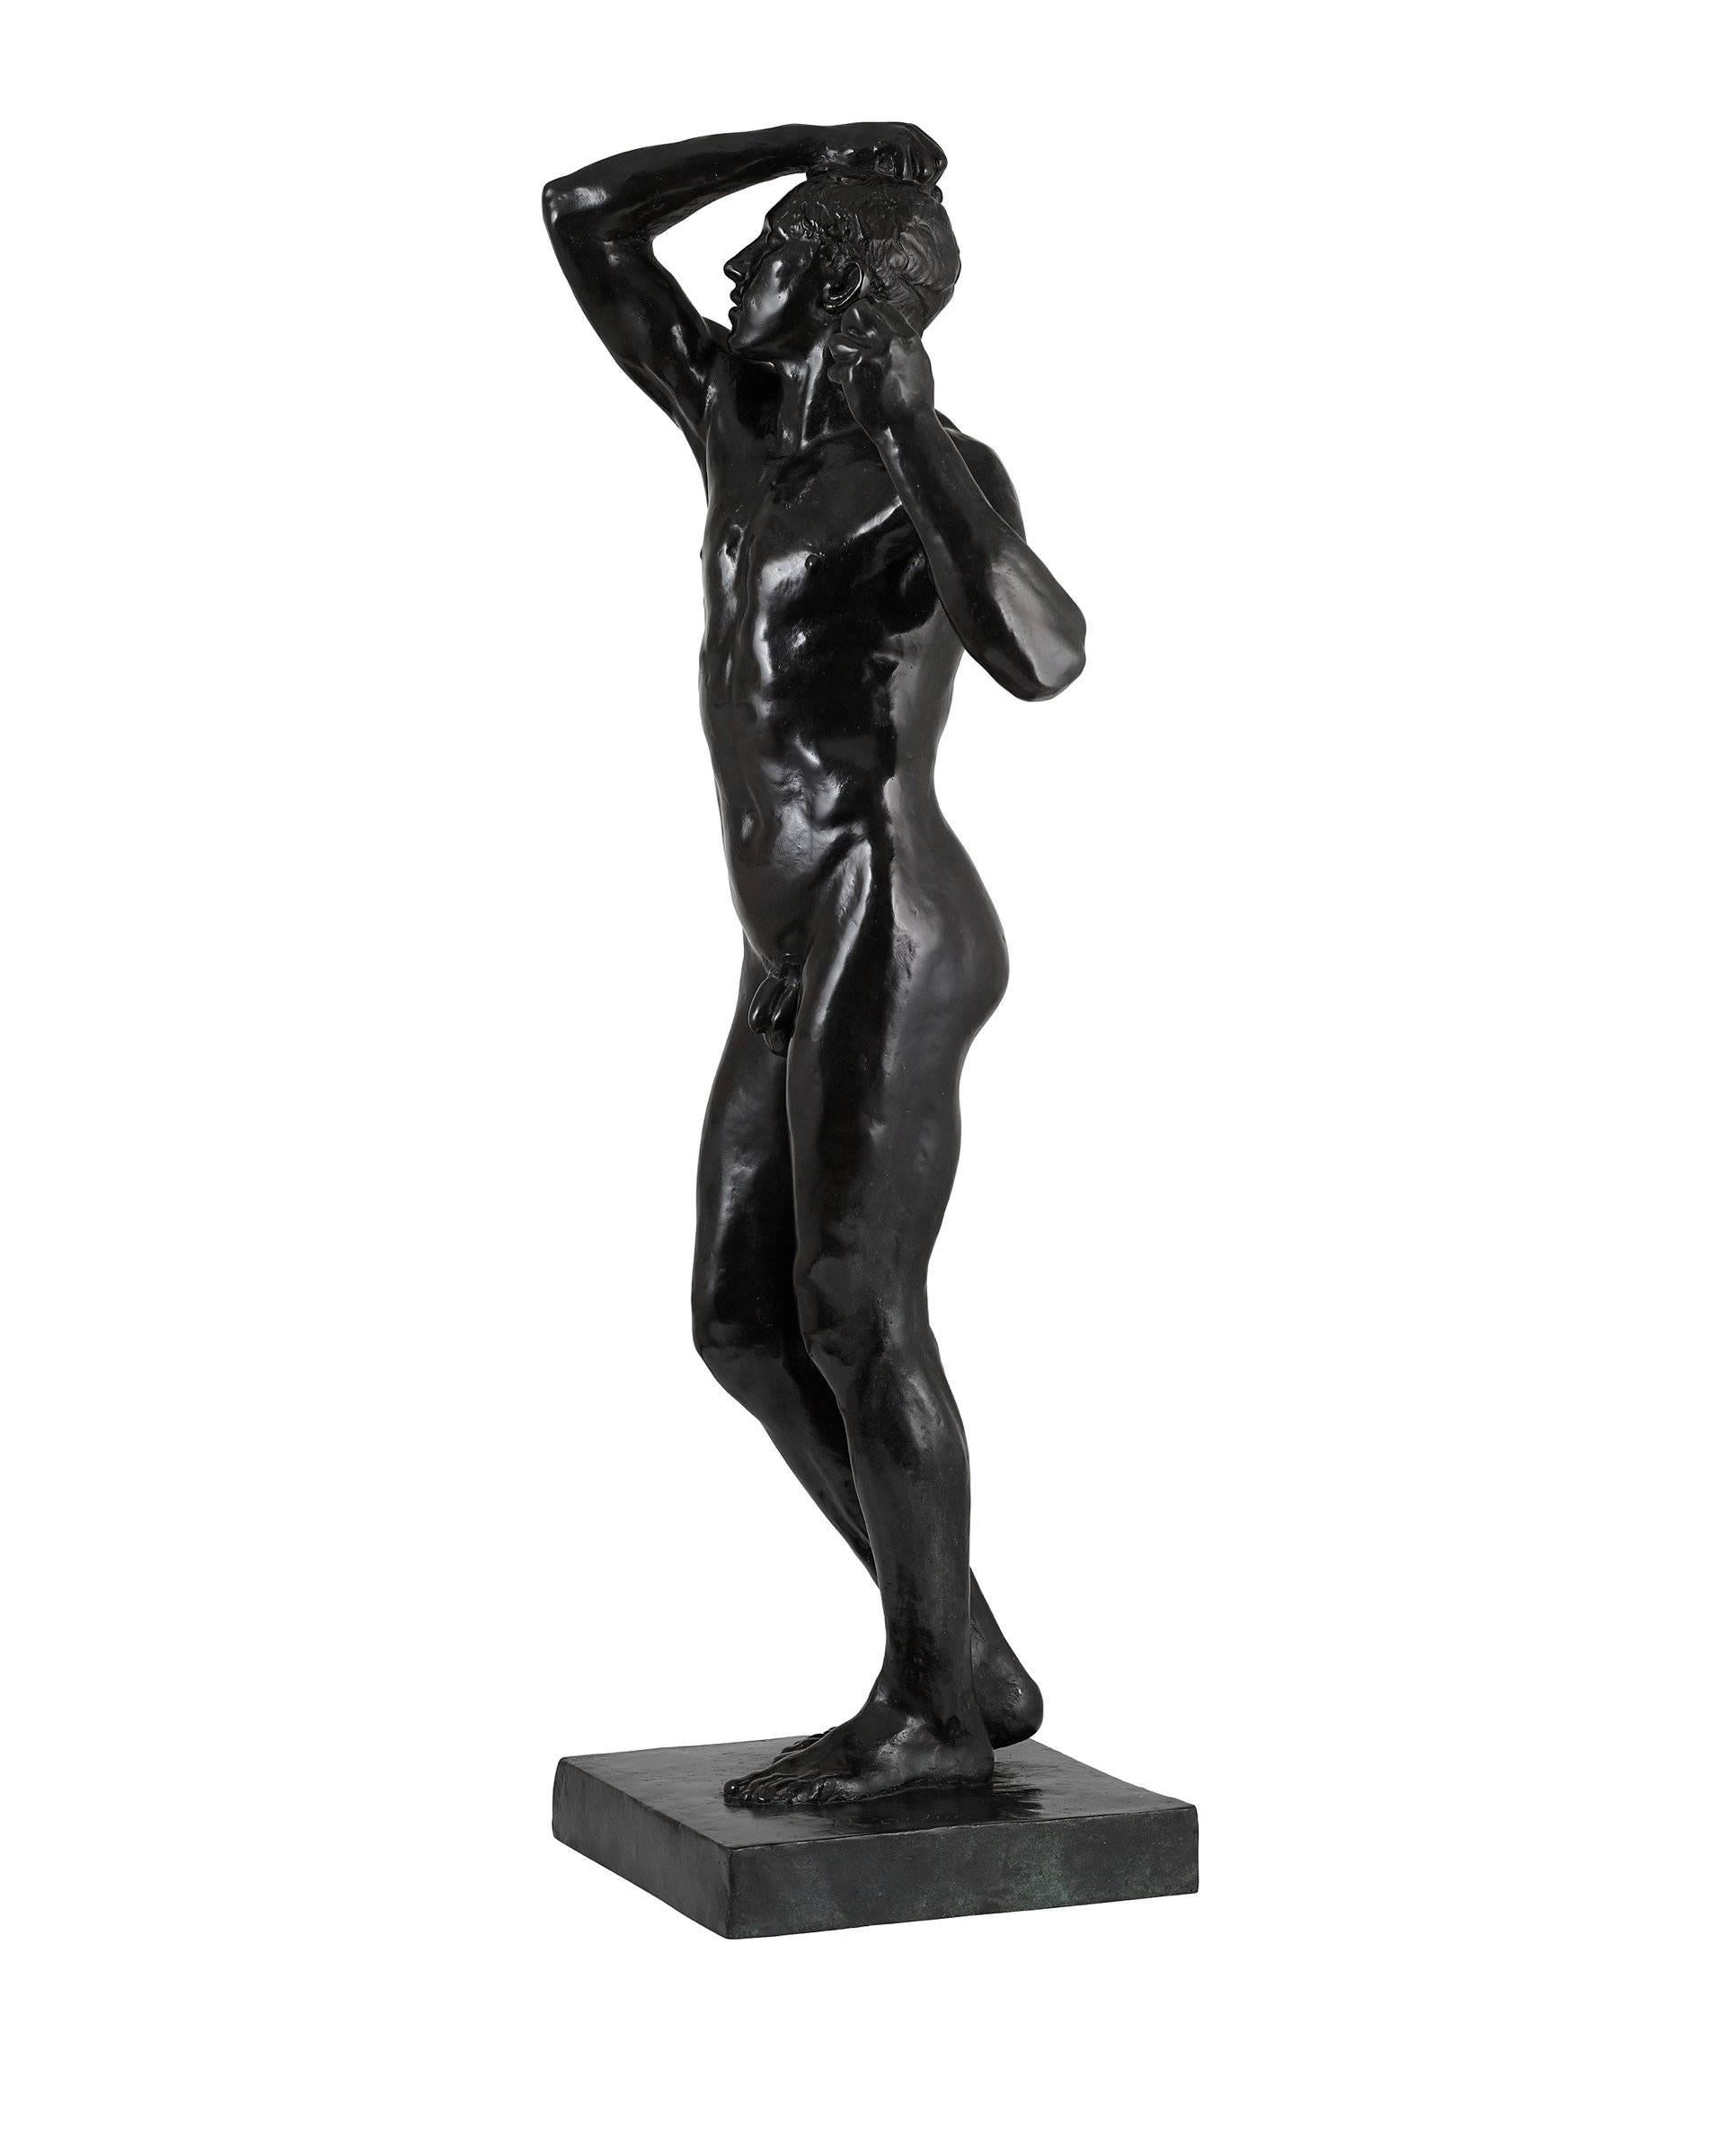 The Age Of Bronze - Sculpture by Auguste Rodin